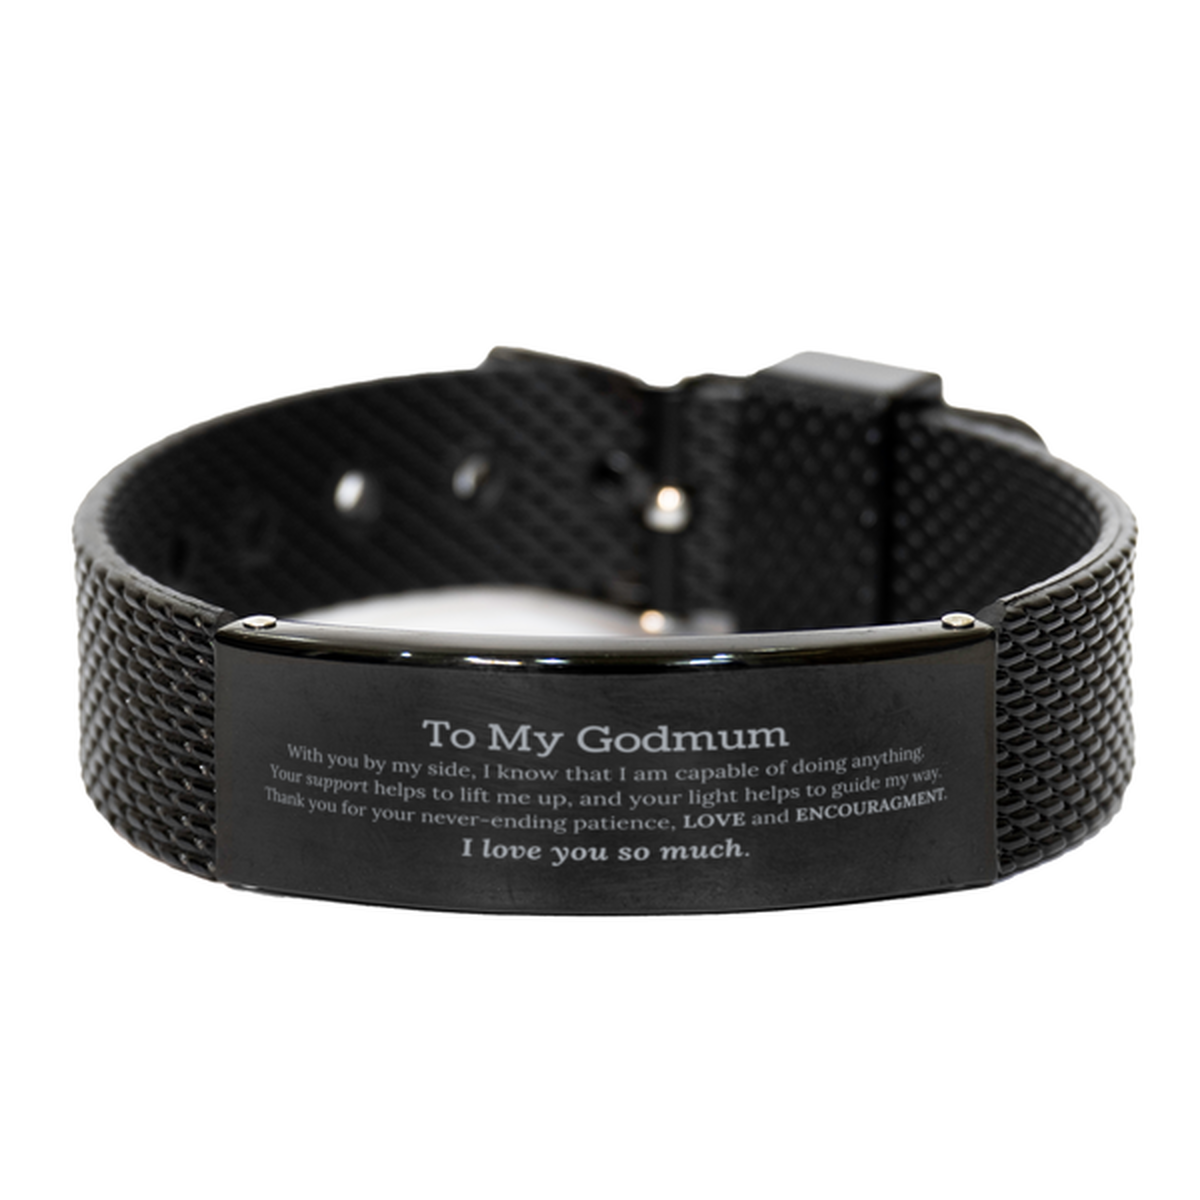 Appreciation Godmum Black Shark Mesh Bracelet Gifts, To My Godmum Birthday Christmas Wedding Keepsake Gifts for Godmum With you by my side, I know that I am capable of doing anything. I love you so much